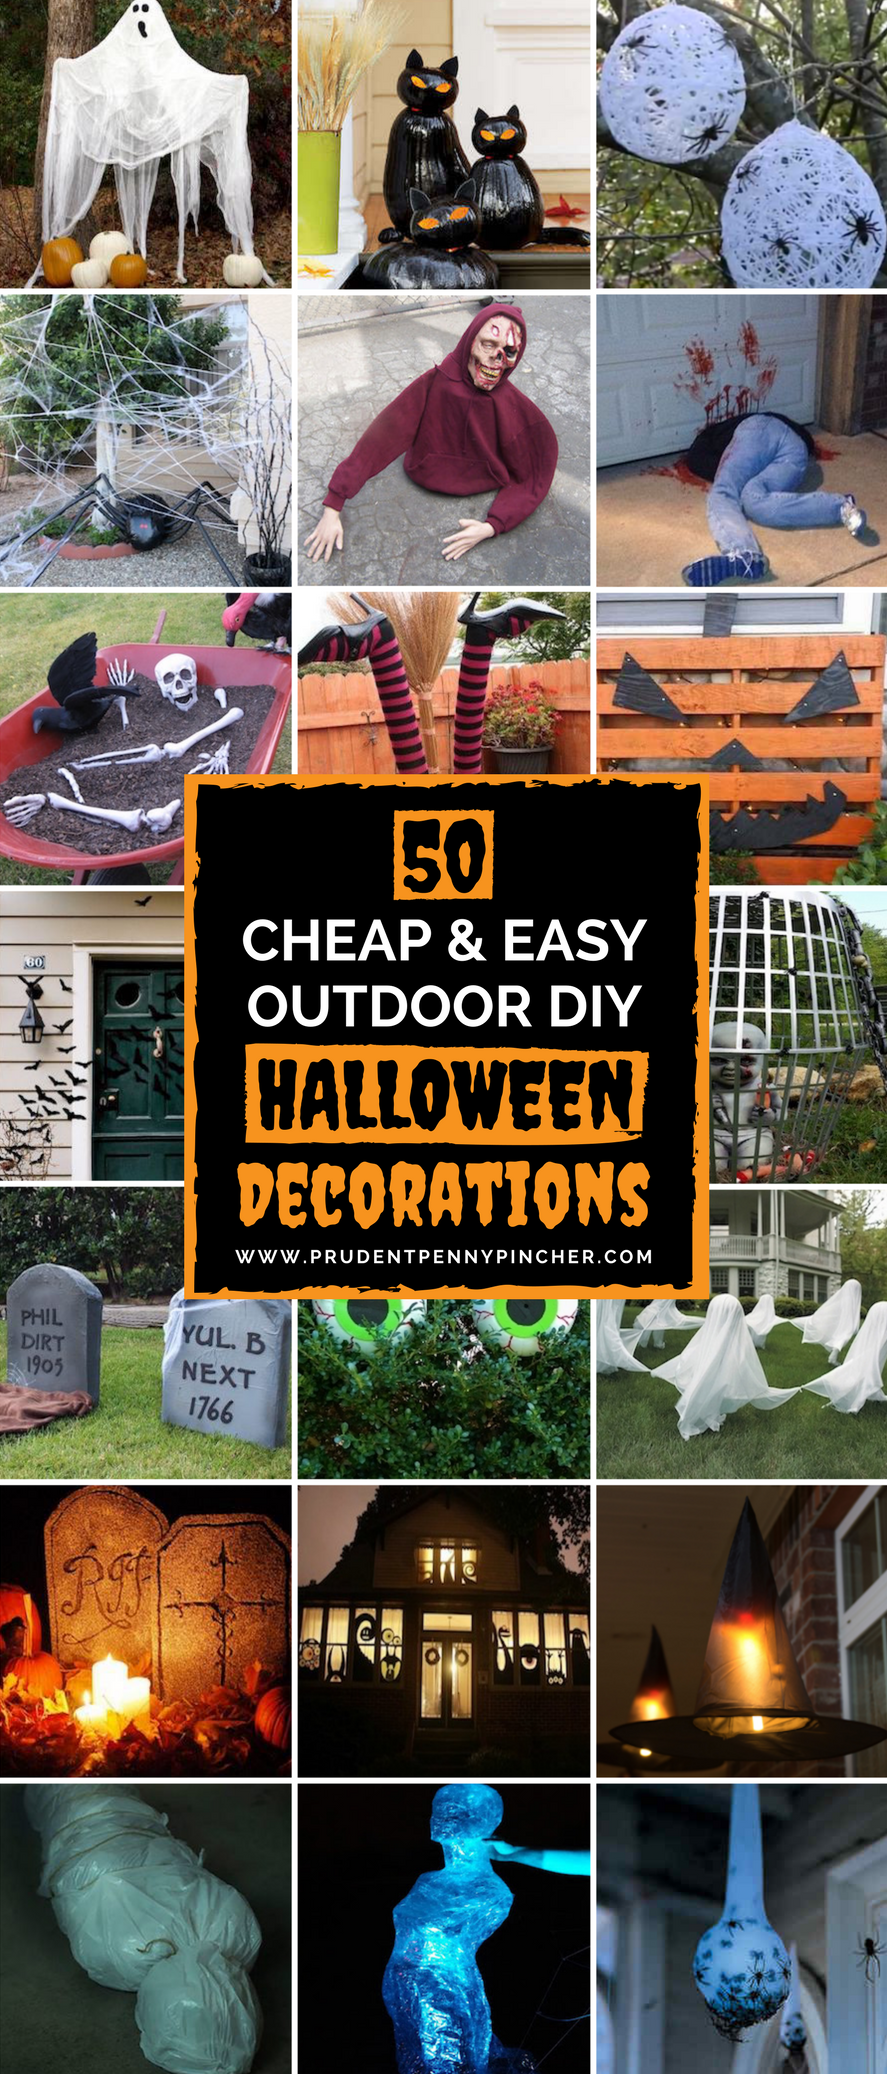 Aesthetic Halloween Decorations for Your Outdoor Space